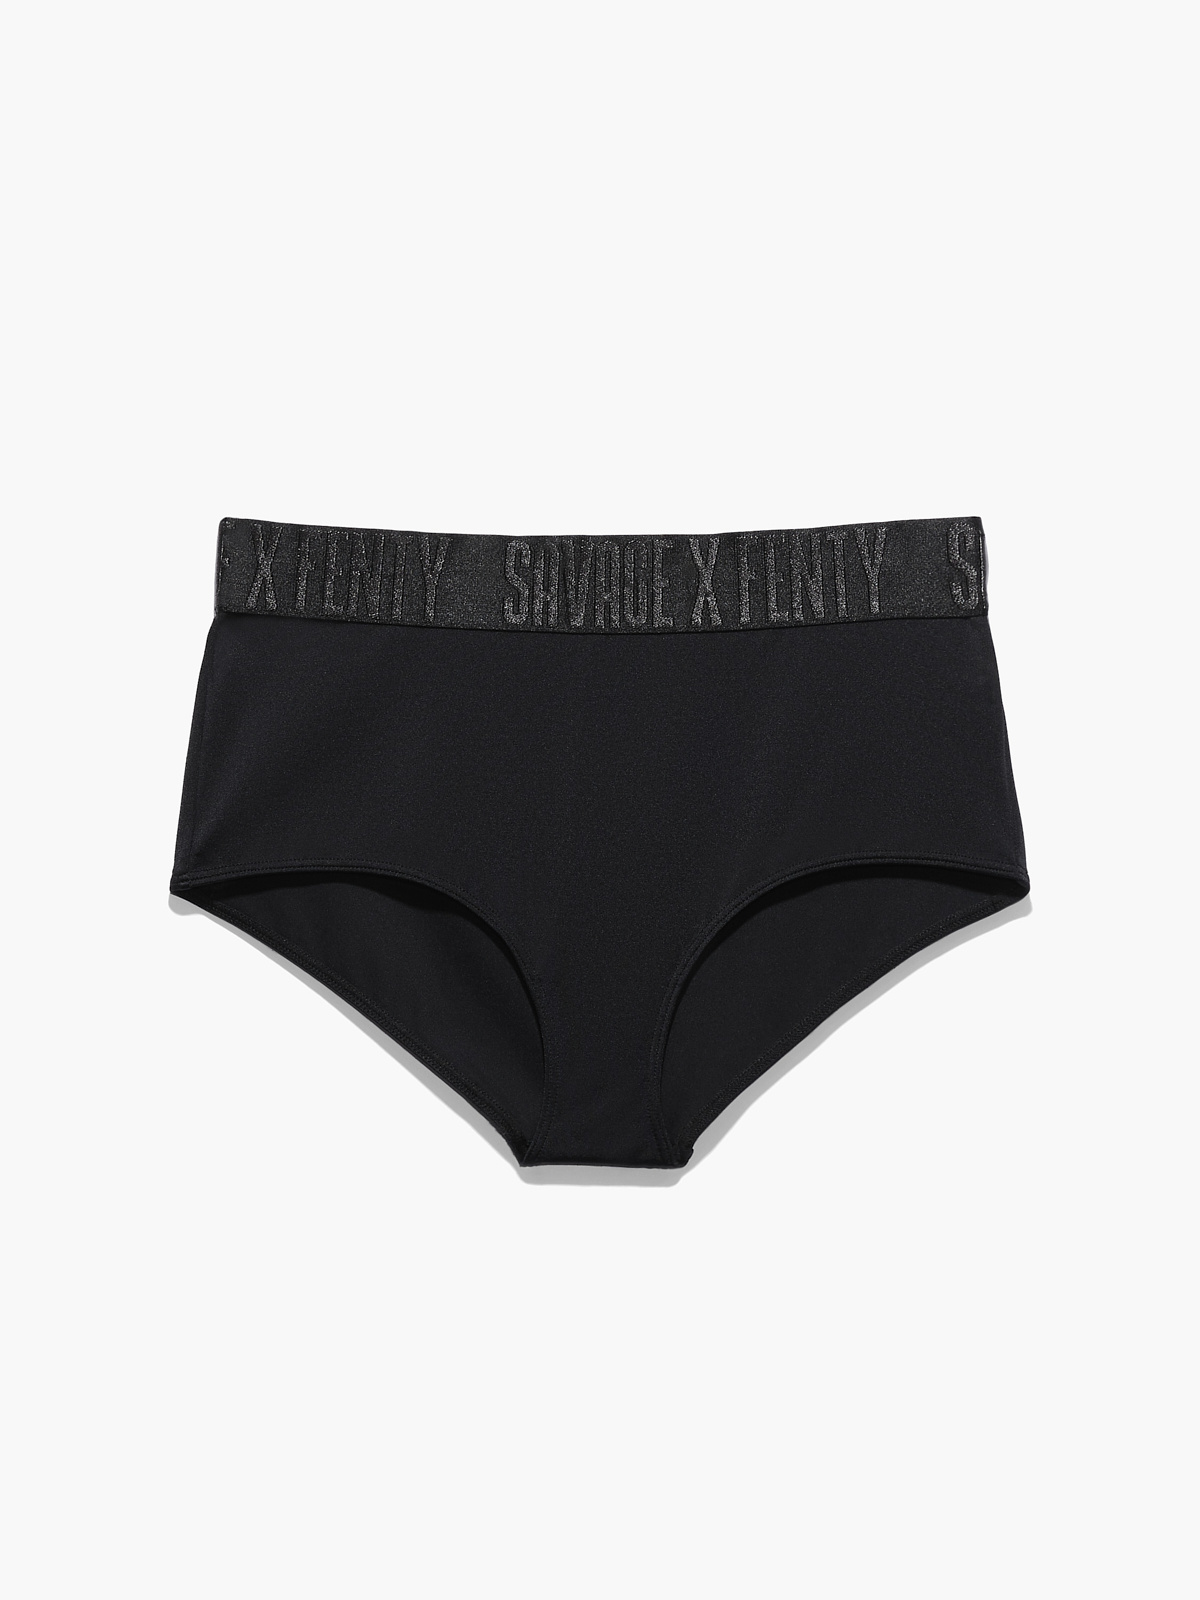 Forever Savage Booty Short in Black